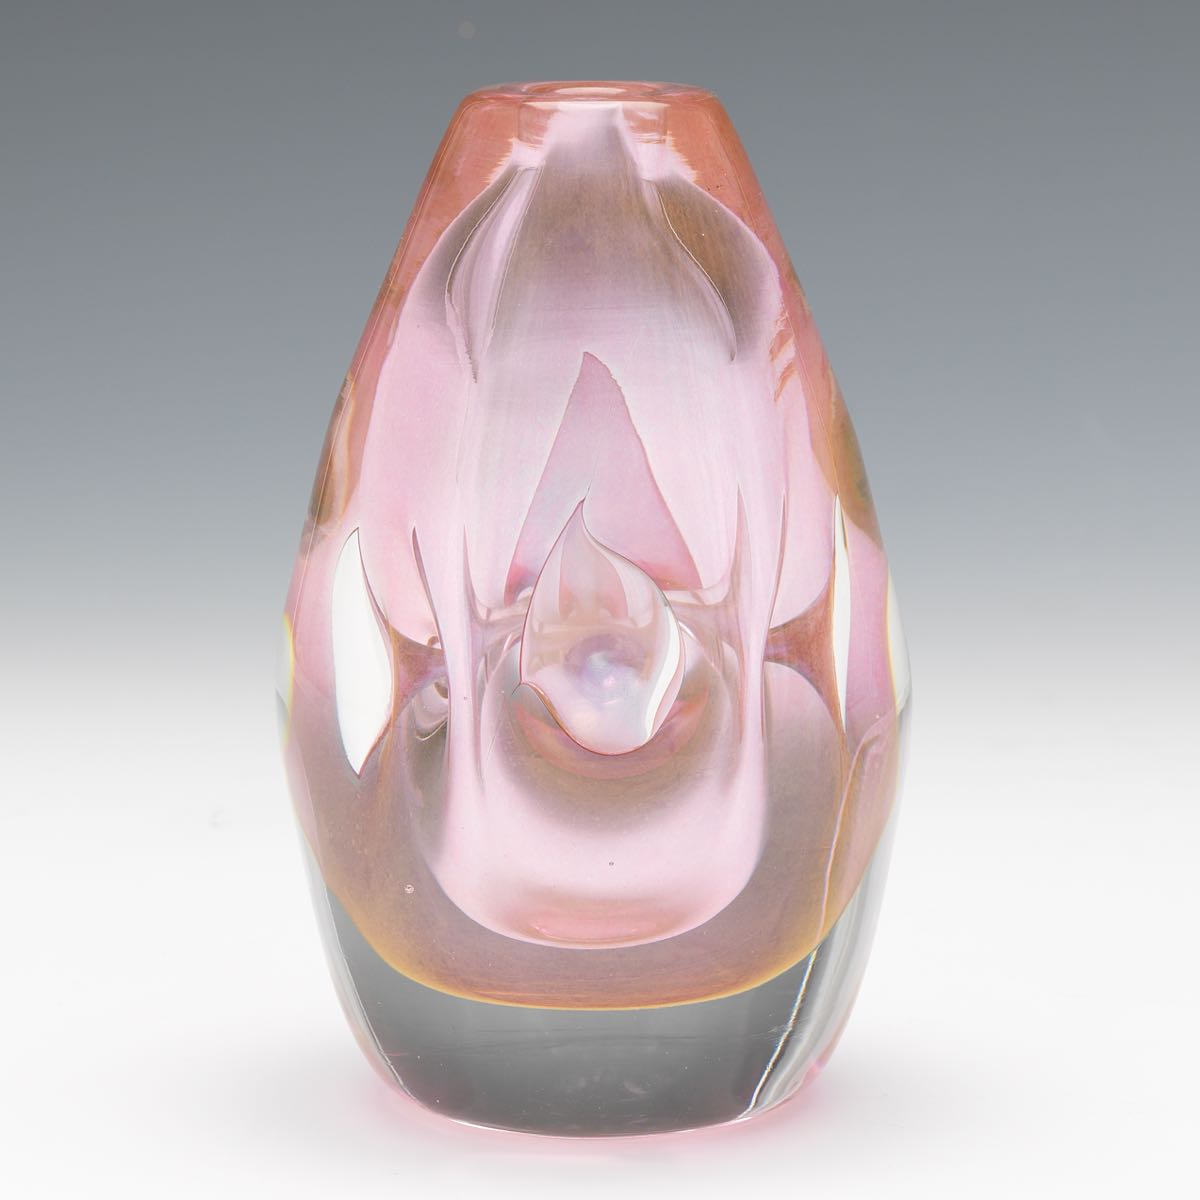 Dominick Labino (American, 1910-1987) 5-1/2" x 3-1/2"Blown glass vase in clear and colorless pink